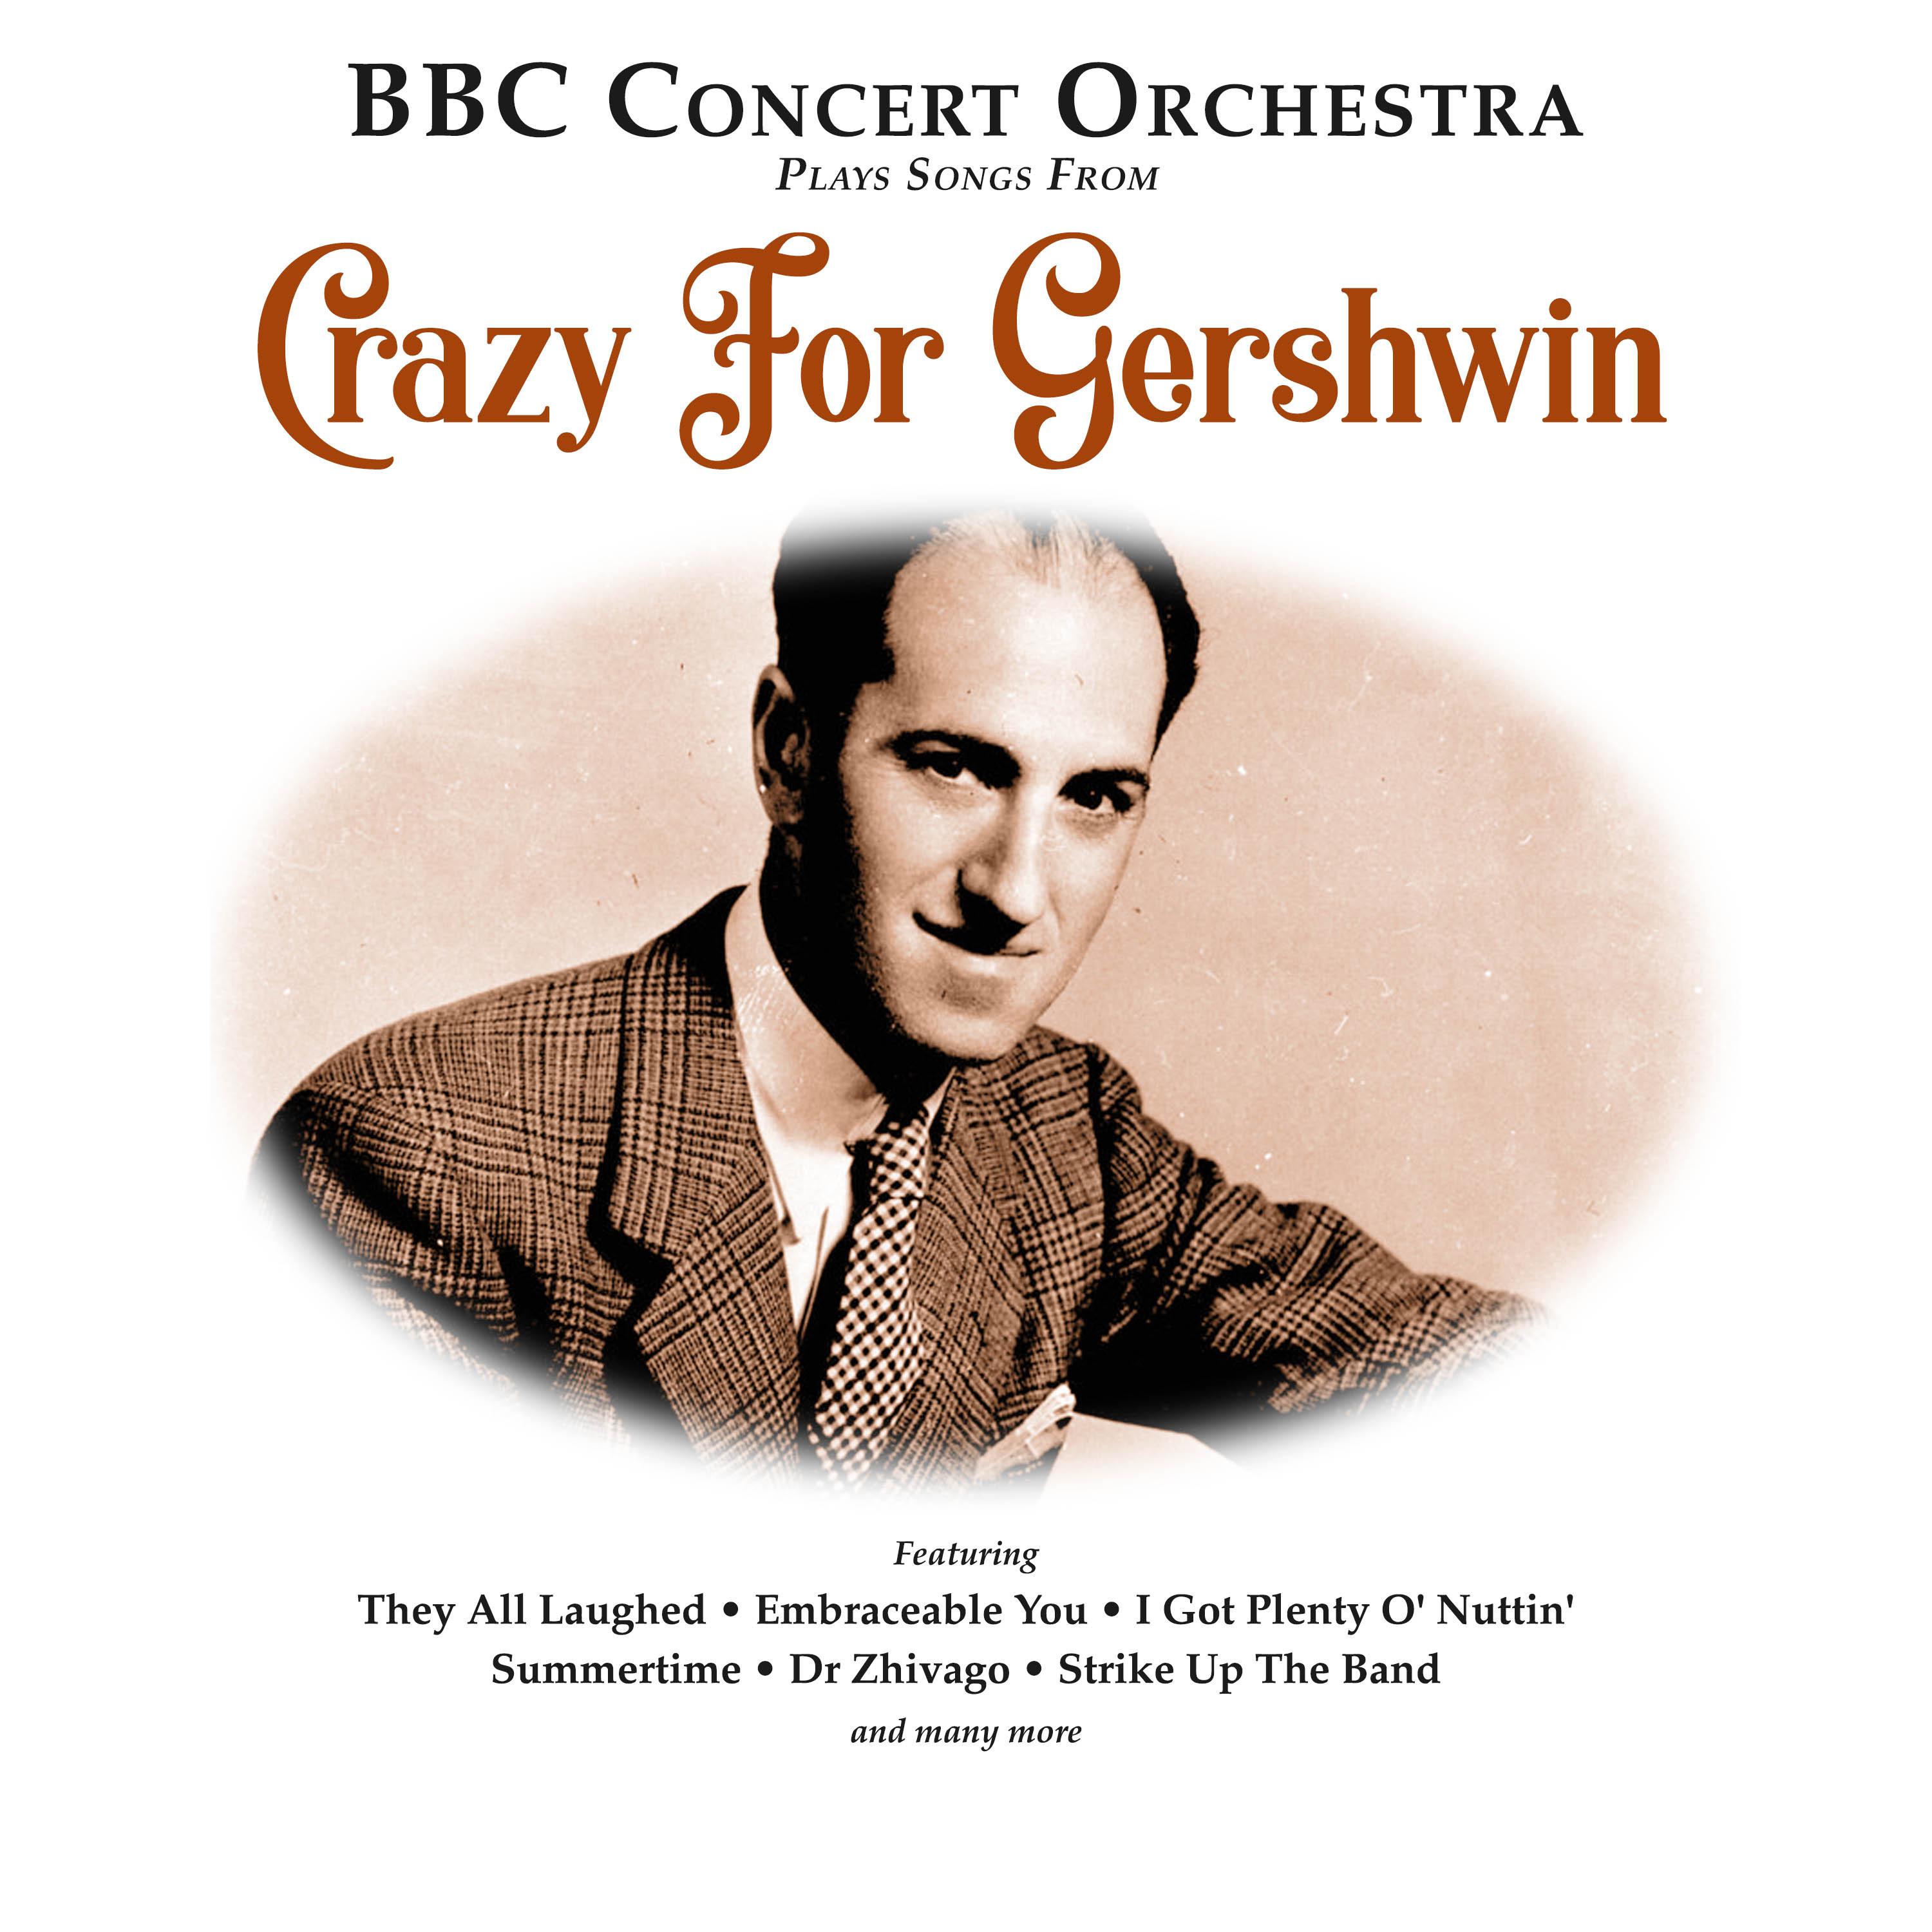 Gershwin in Hollywood Medley: The Back Bay Polka / A Foggy Day / Slap That Bass / Love Walked in / Nice Work if You can get it / One Two Three / Love is Here to Stay / They Can't Take That Away from Me